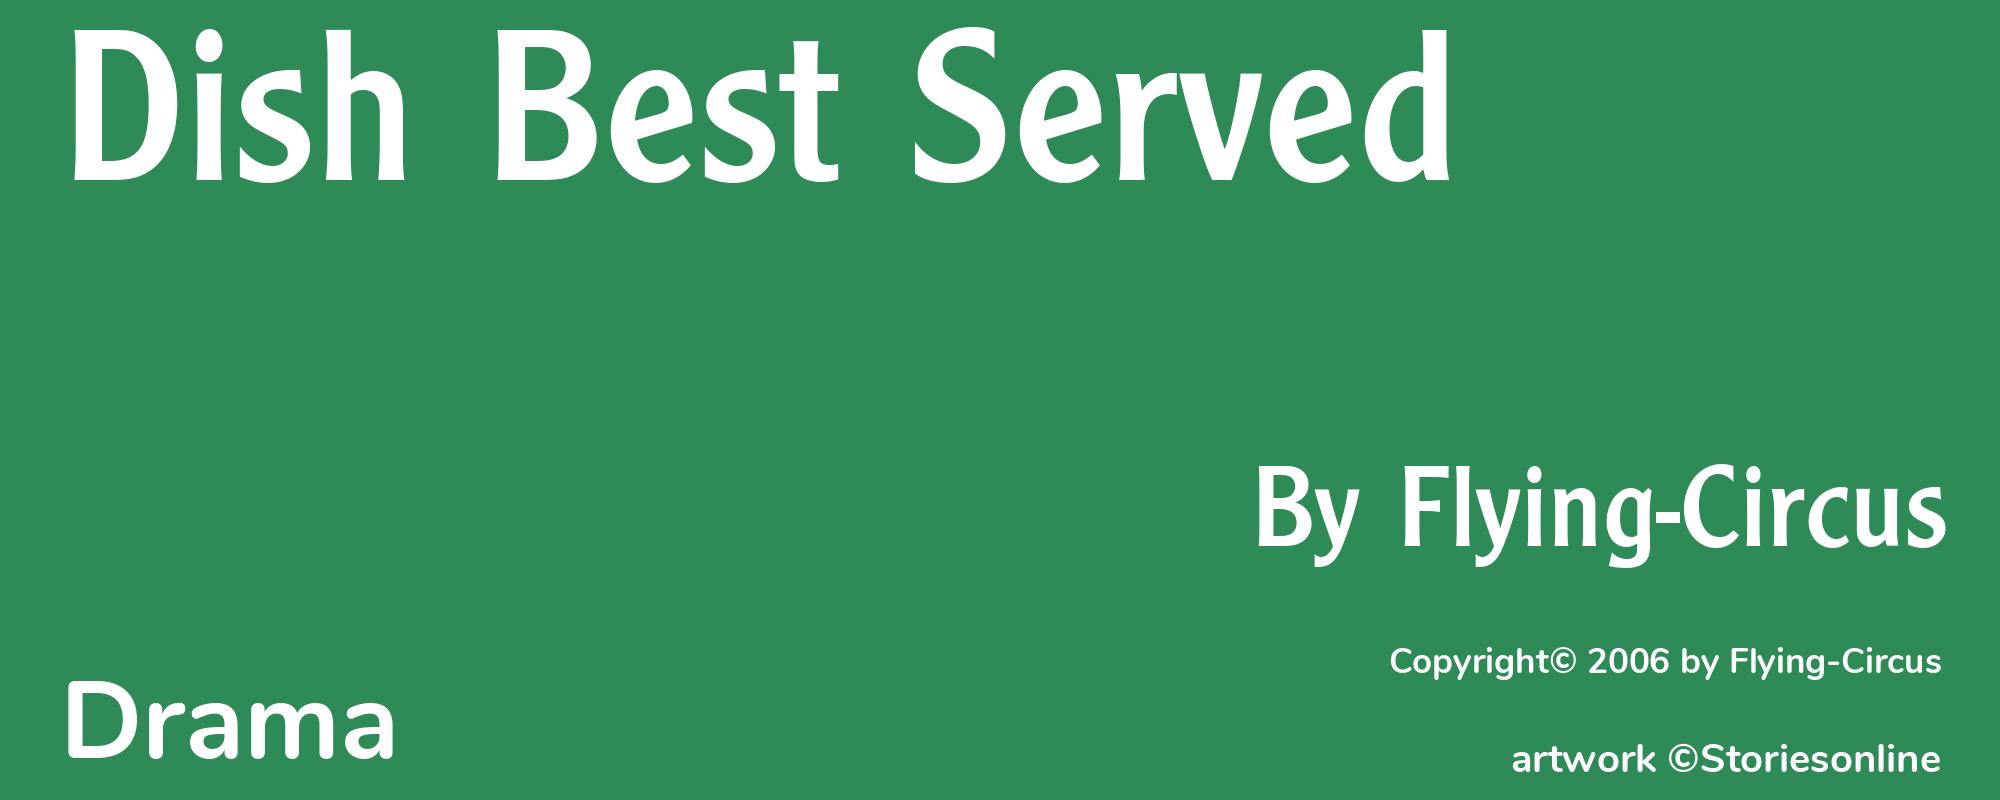 Dish Best Served - Cover